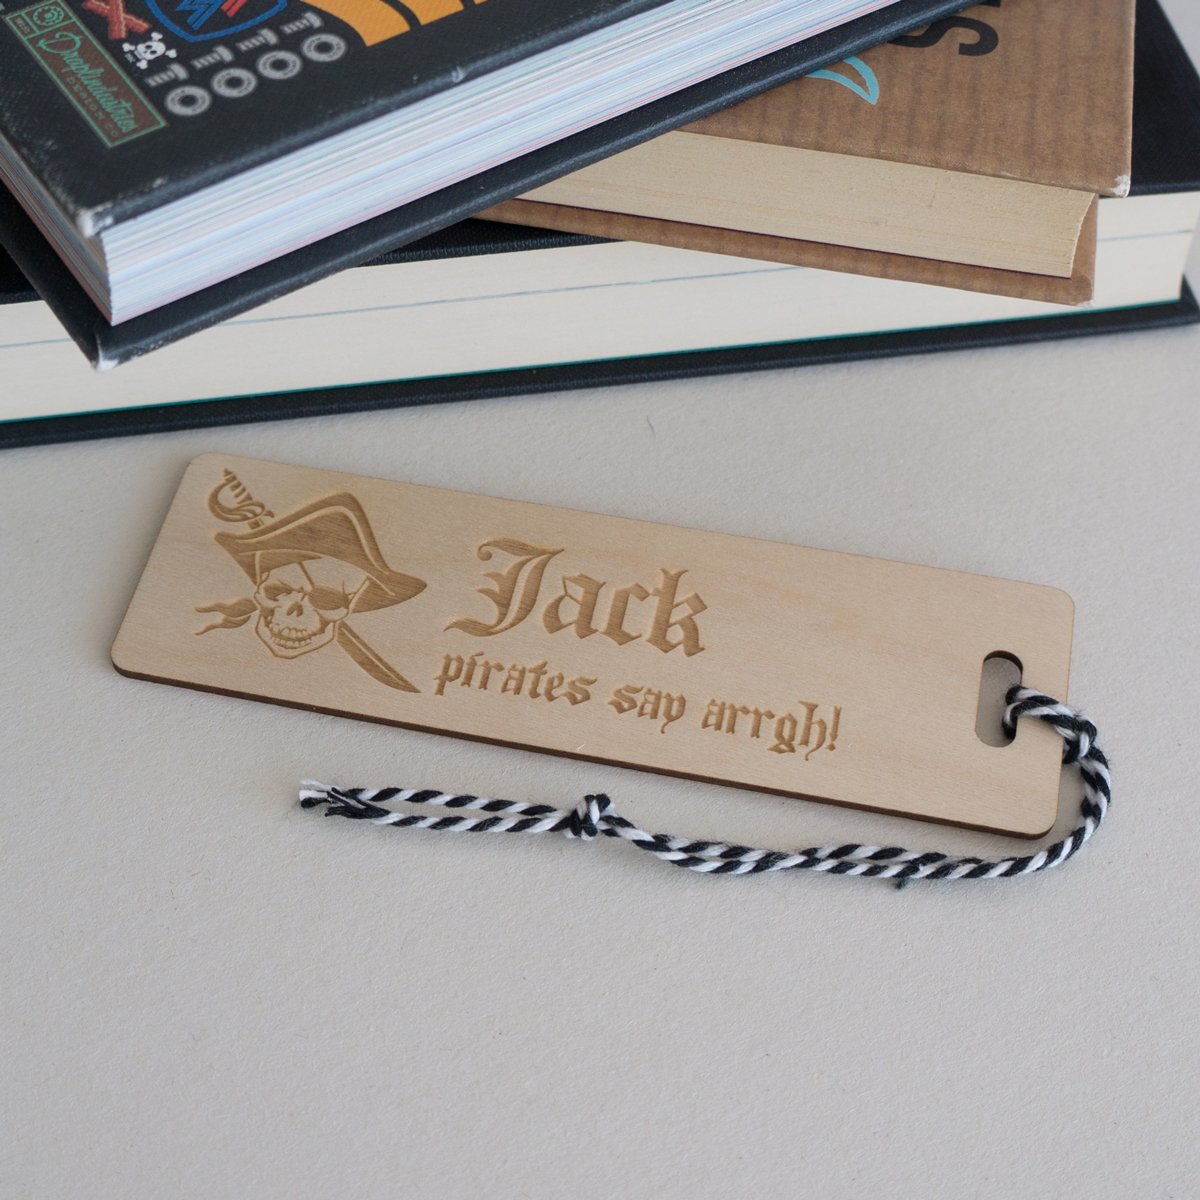 Our engraved bookmarks cane be personalised making them the unique gift for all occasions Belvedere collections.